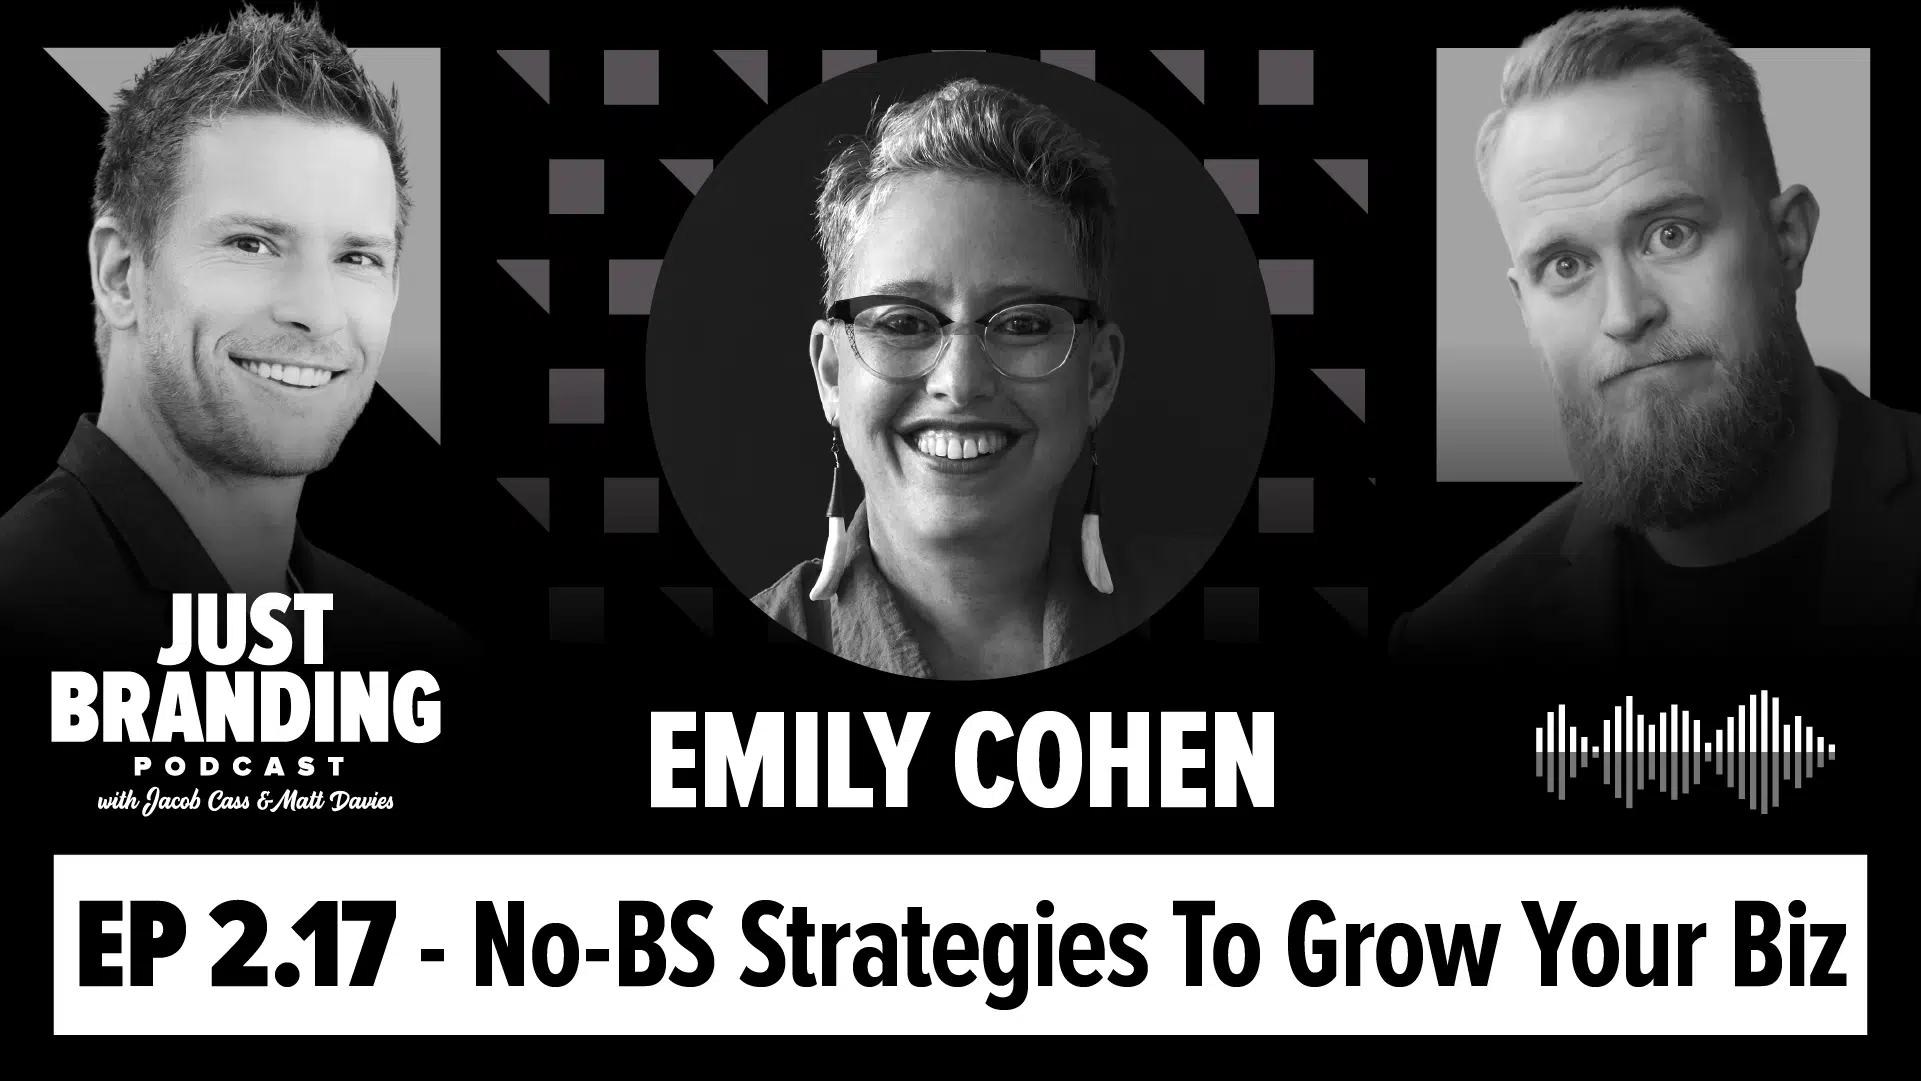 No-BS Strategies To Evolve Your Creative Business with Emily Cohen